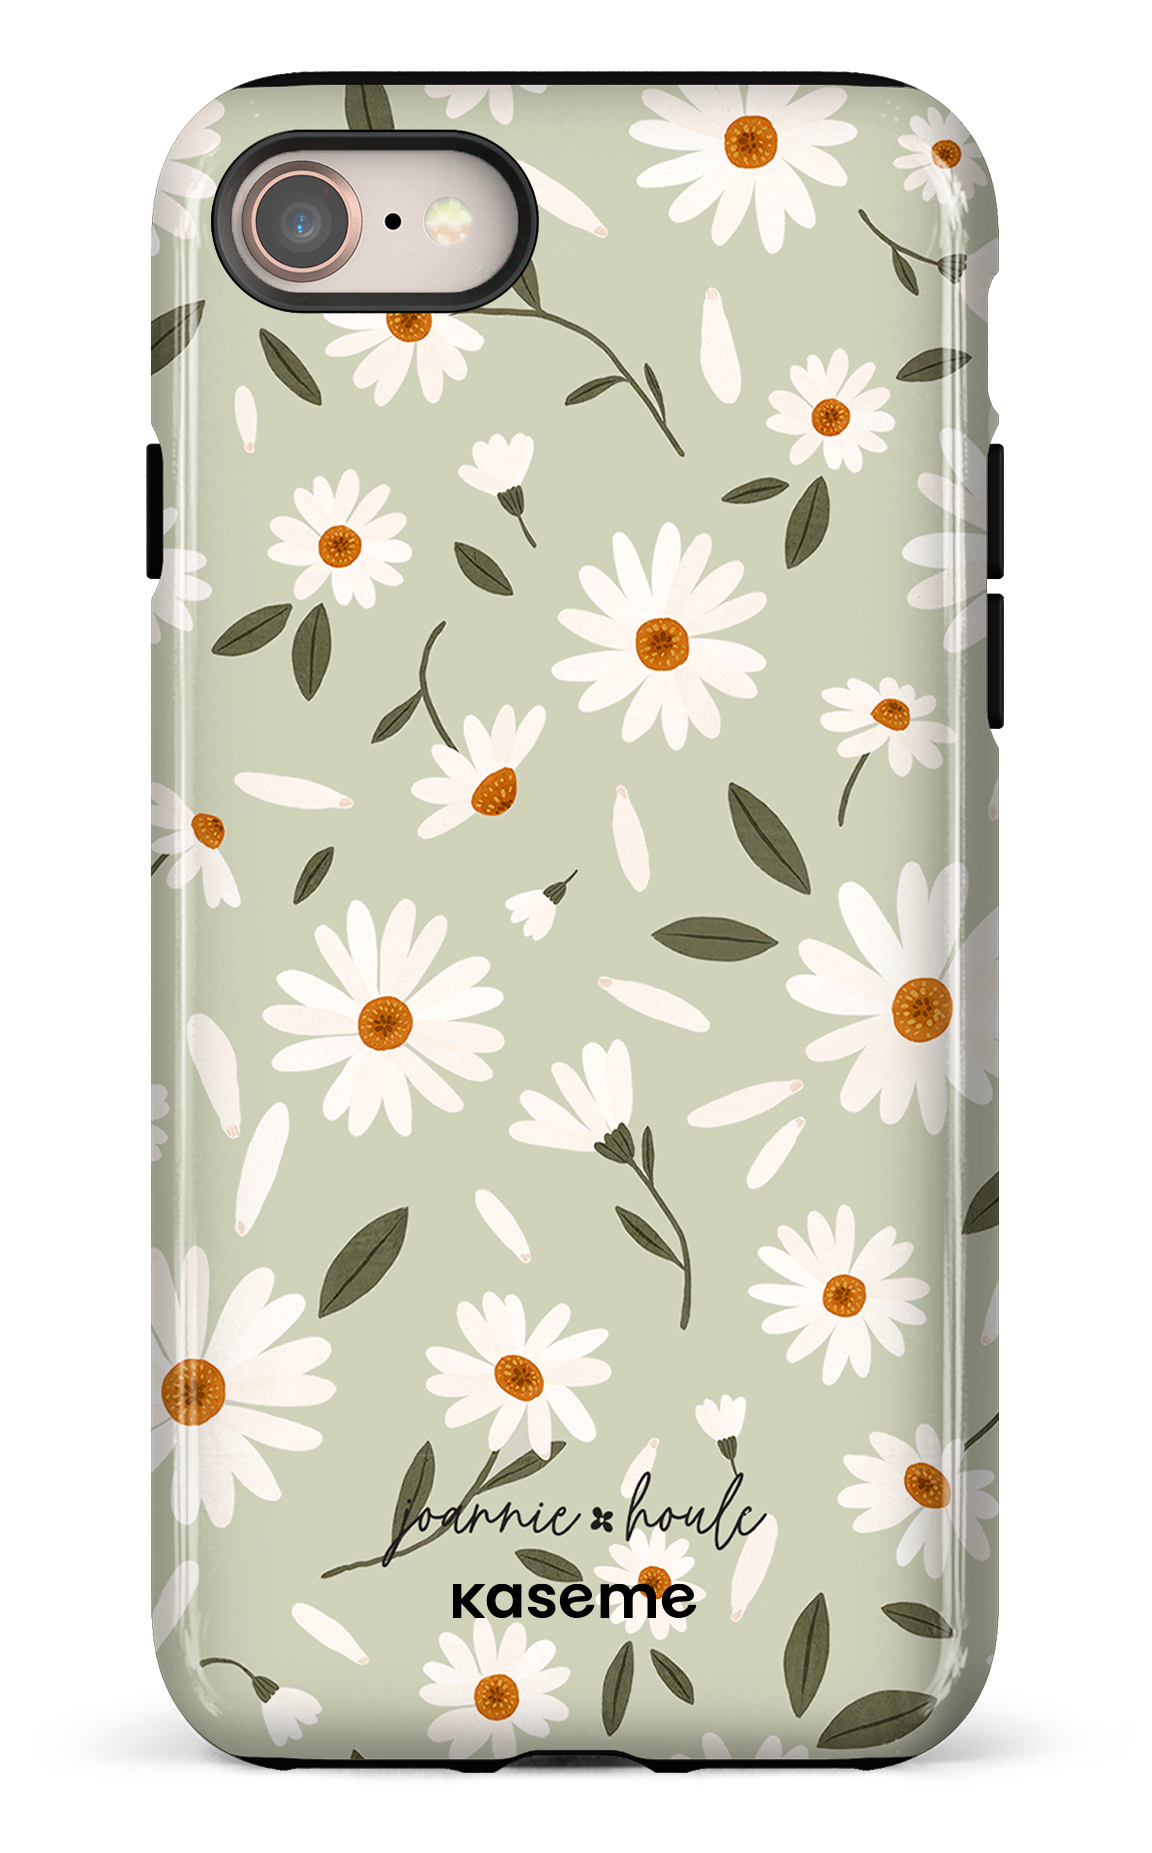 Daisy Bouquet Sage by Joannie Houle - iPhone SE 2020 / 2022